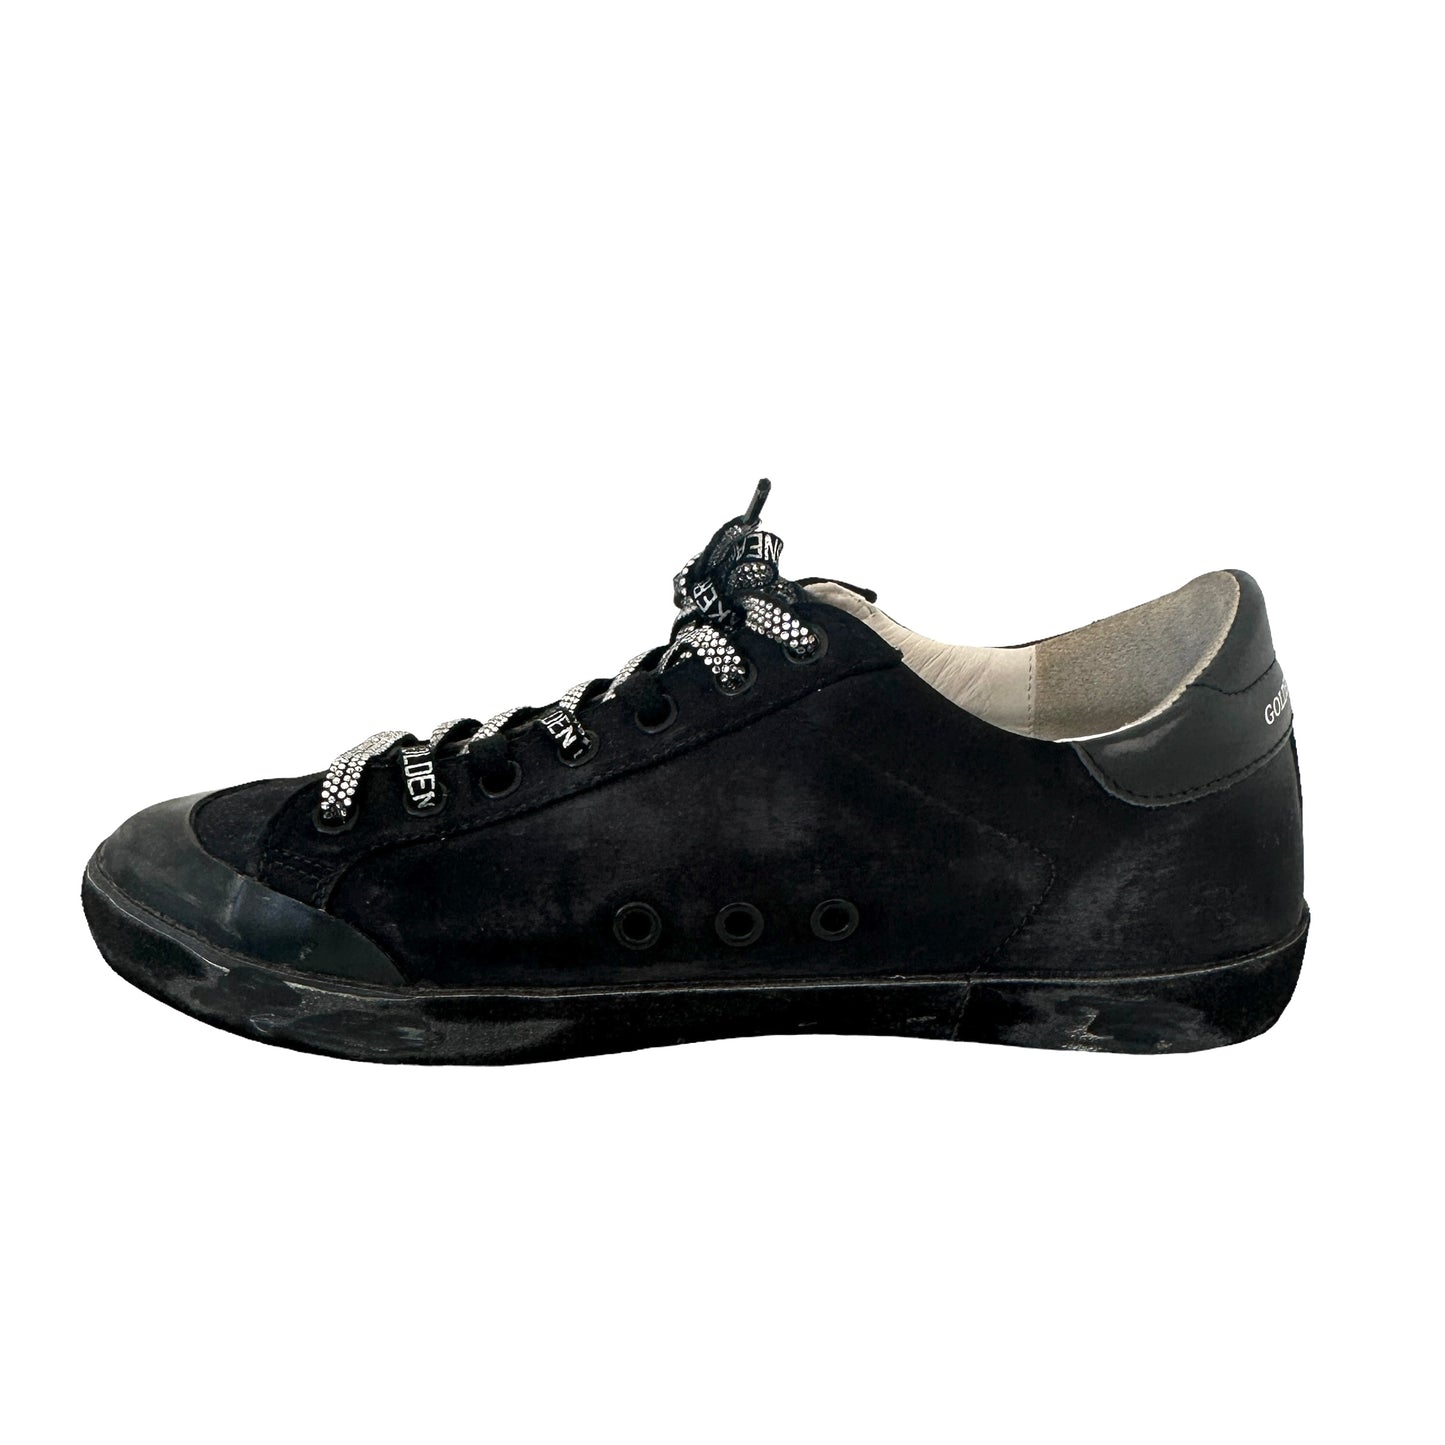 Black Leather & Crystals Sneakers - 9